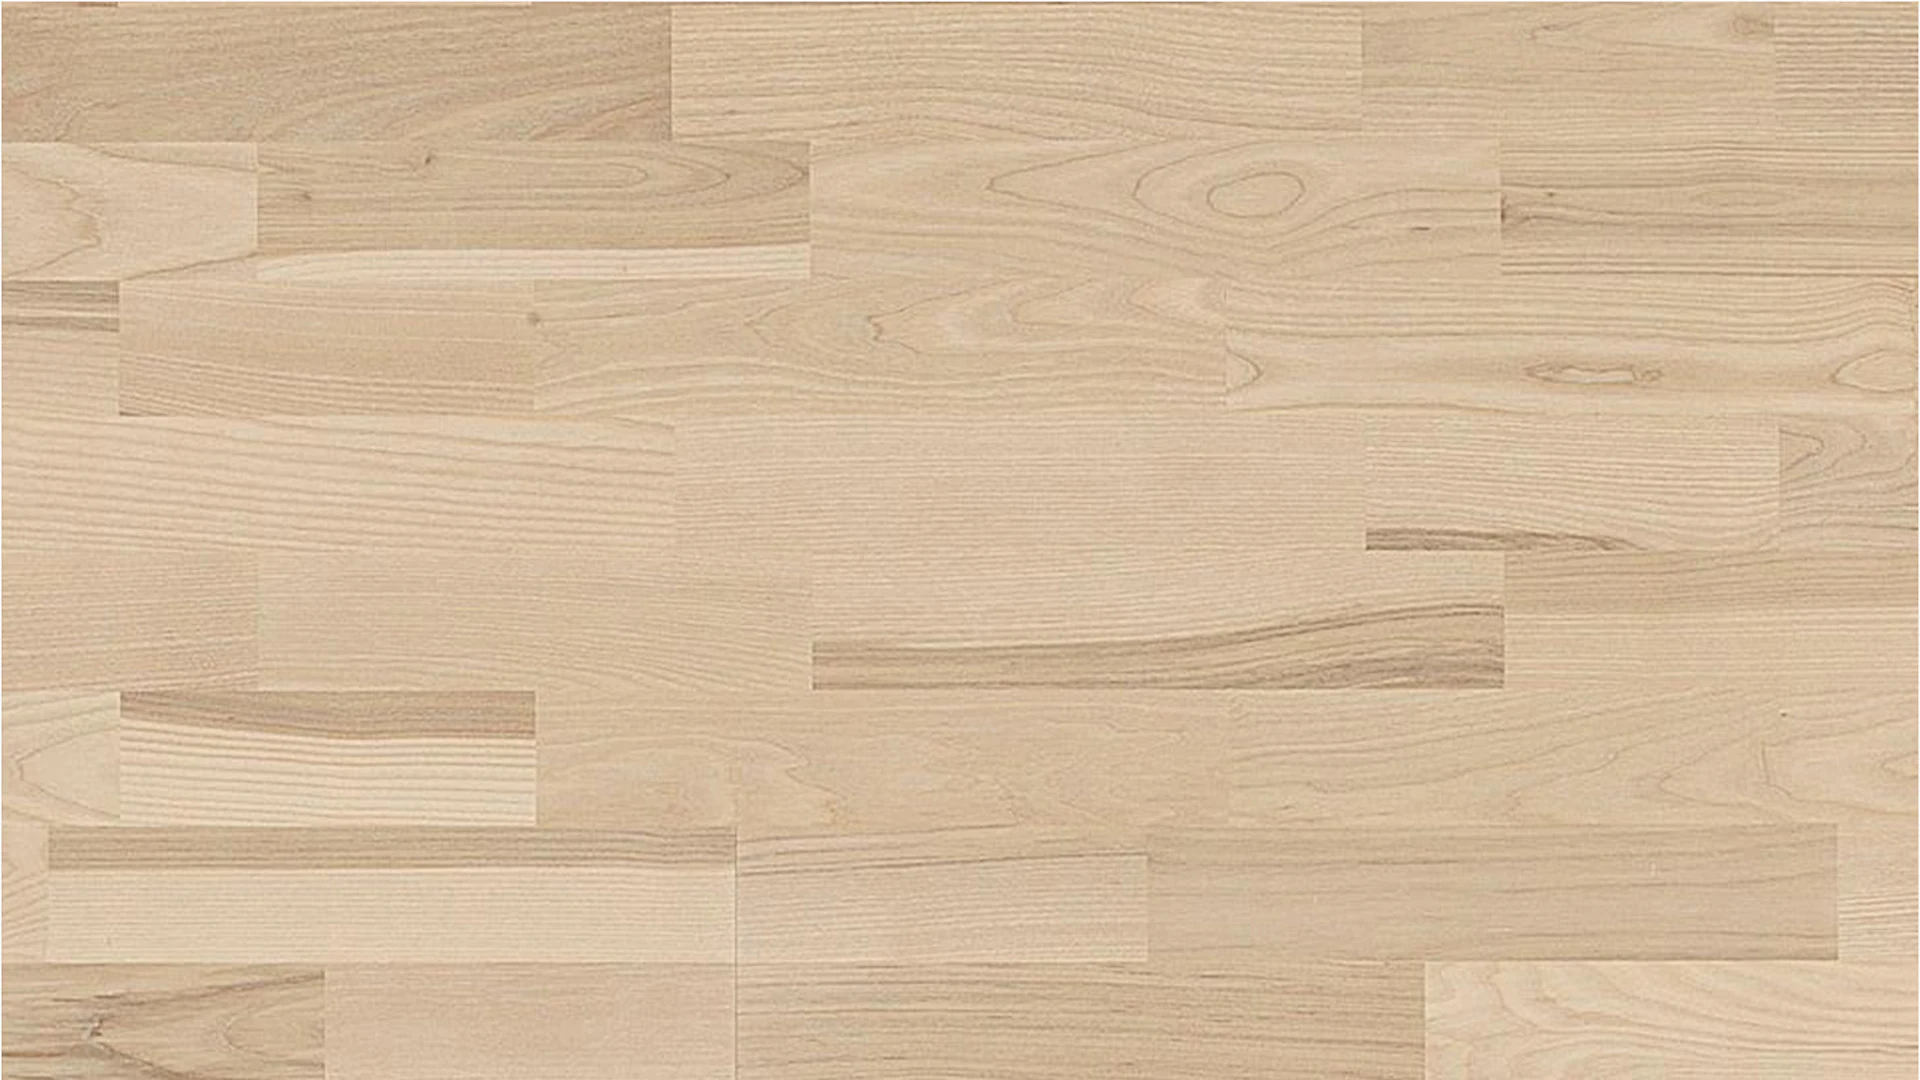 Kährs Parquet - Nordic Naturals Collection Frassino Ceriale bianco (133NACAK1VKW0)